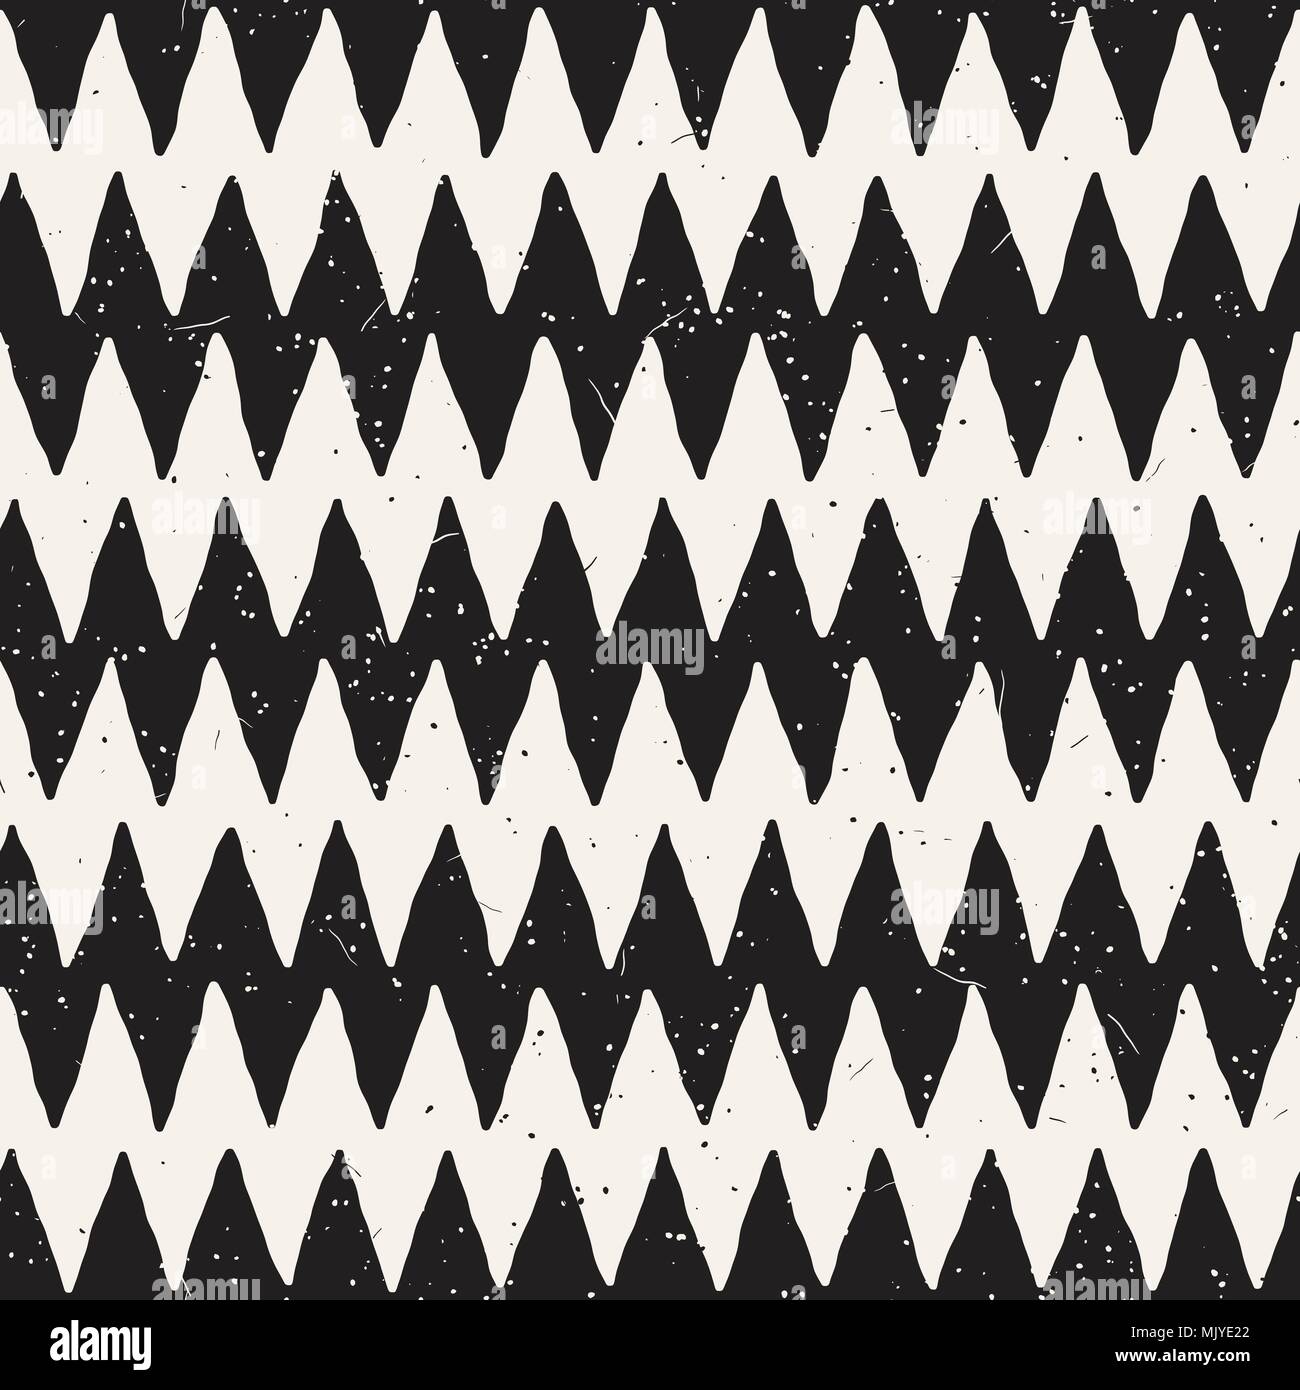 Hand drawn style abstract seamless pattern in black and white. Retro grunge freehand jagged lines texture. Stock Vector